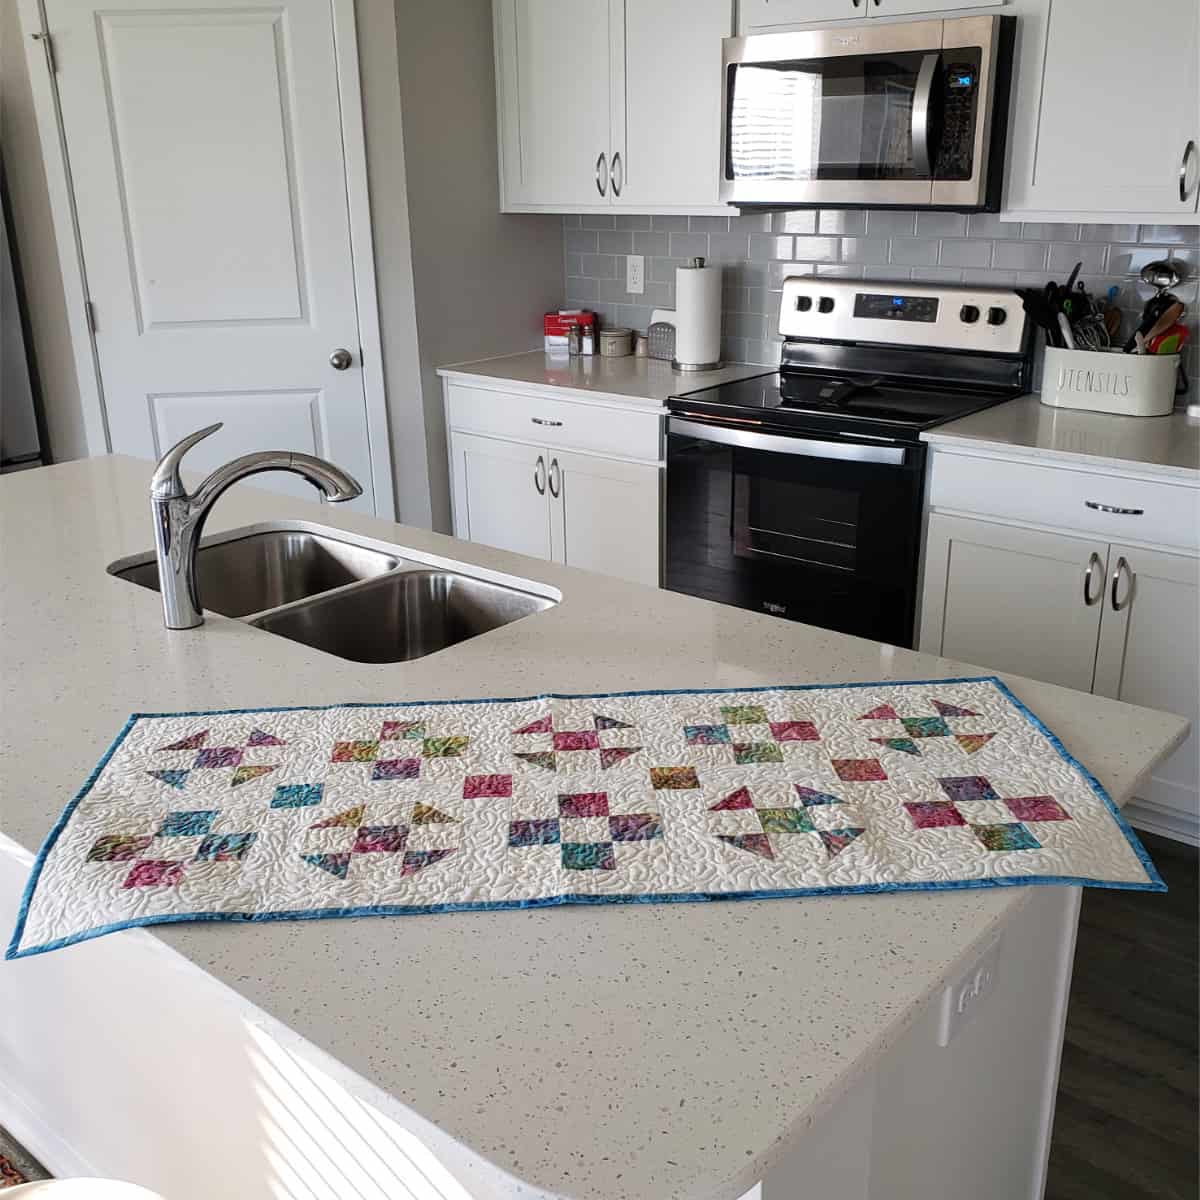 Shoo Fly and 9 Patch table runner on kitchen counter